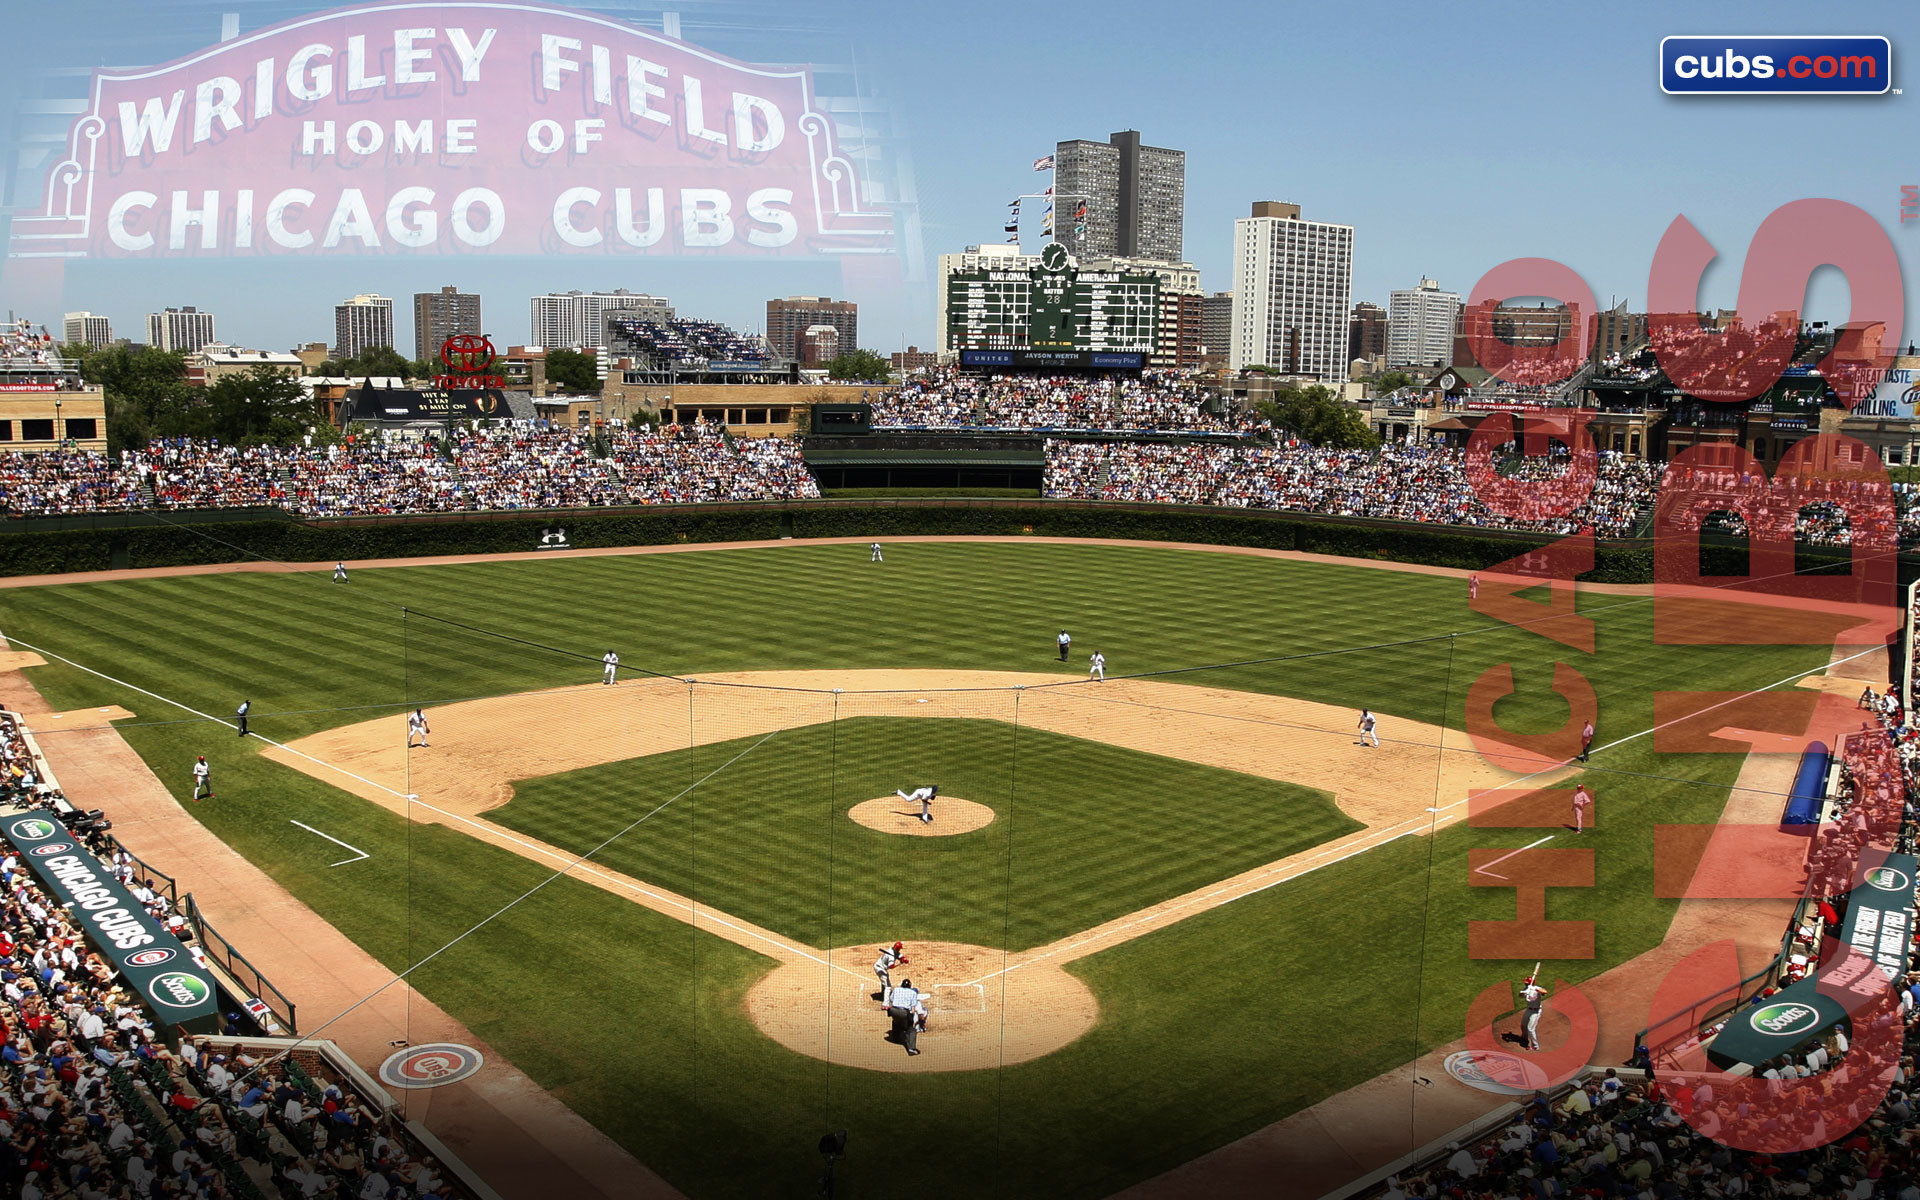 1920x1200 1920x1080 ... chicago cubs wallpaper for android wallpapersafari .